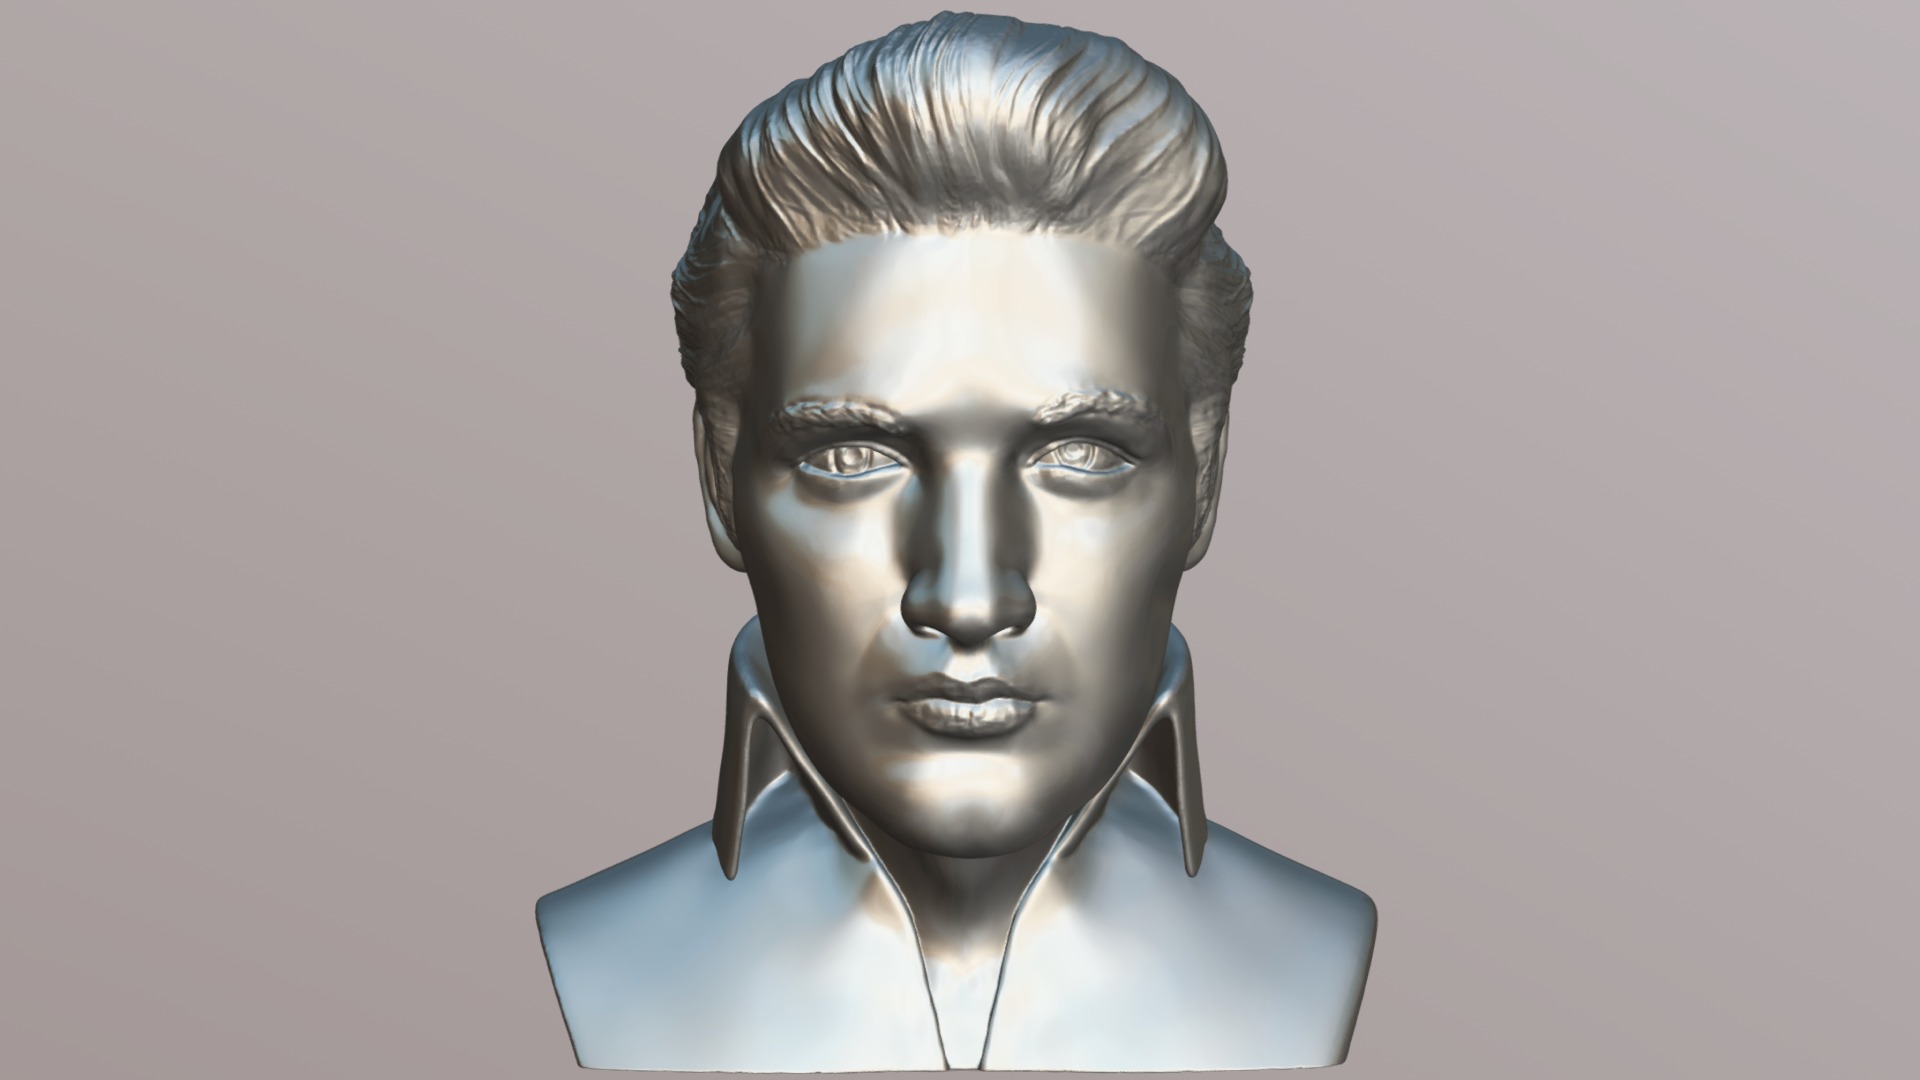 3D model Elvis Presley bust for 3D printing - This is a 3D model of the Elvis Presley bust for 3D printing. The 3D model is about a statue of a person.